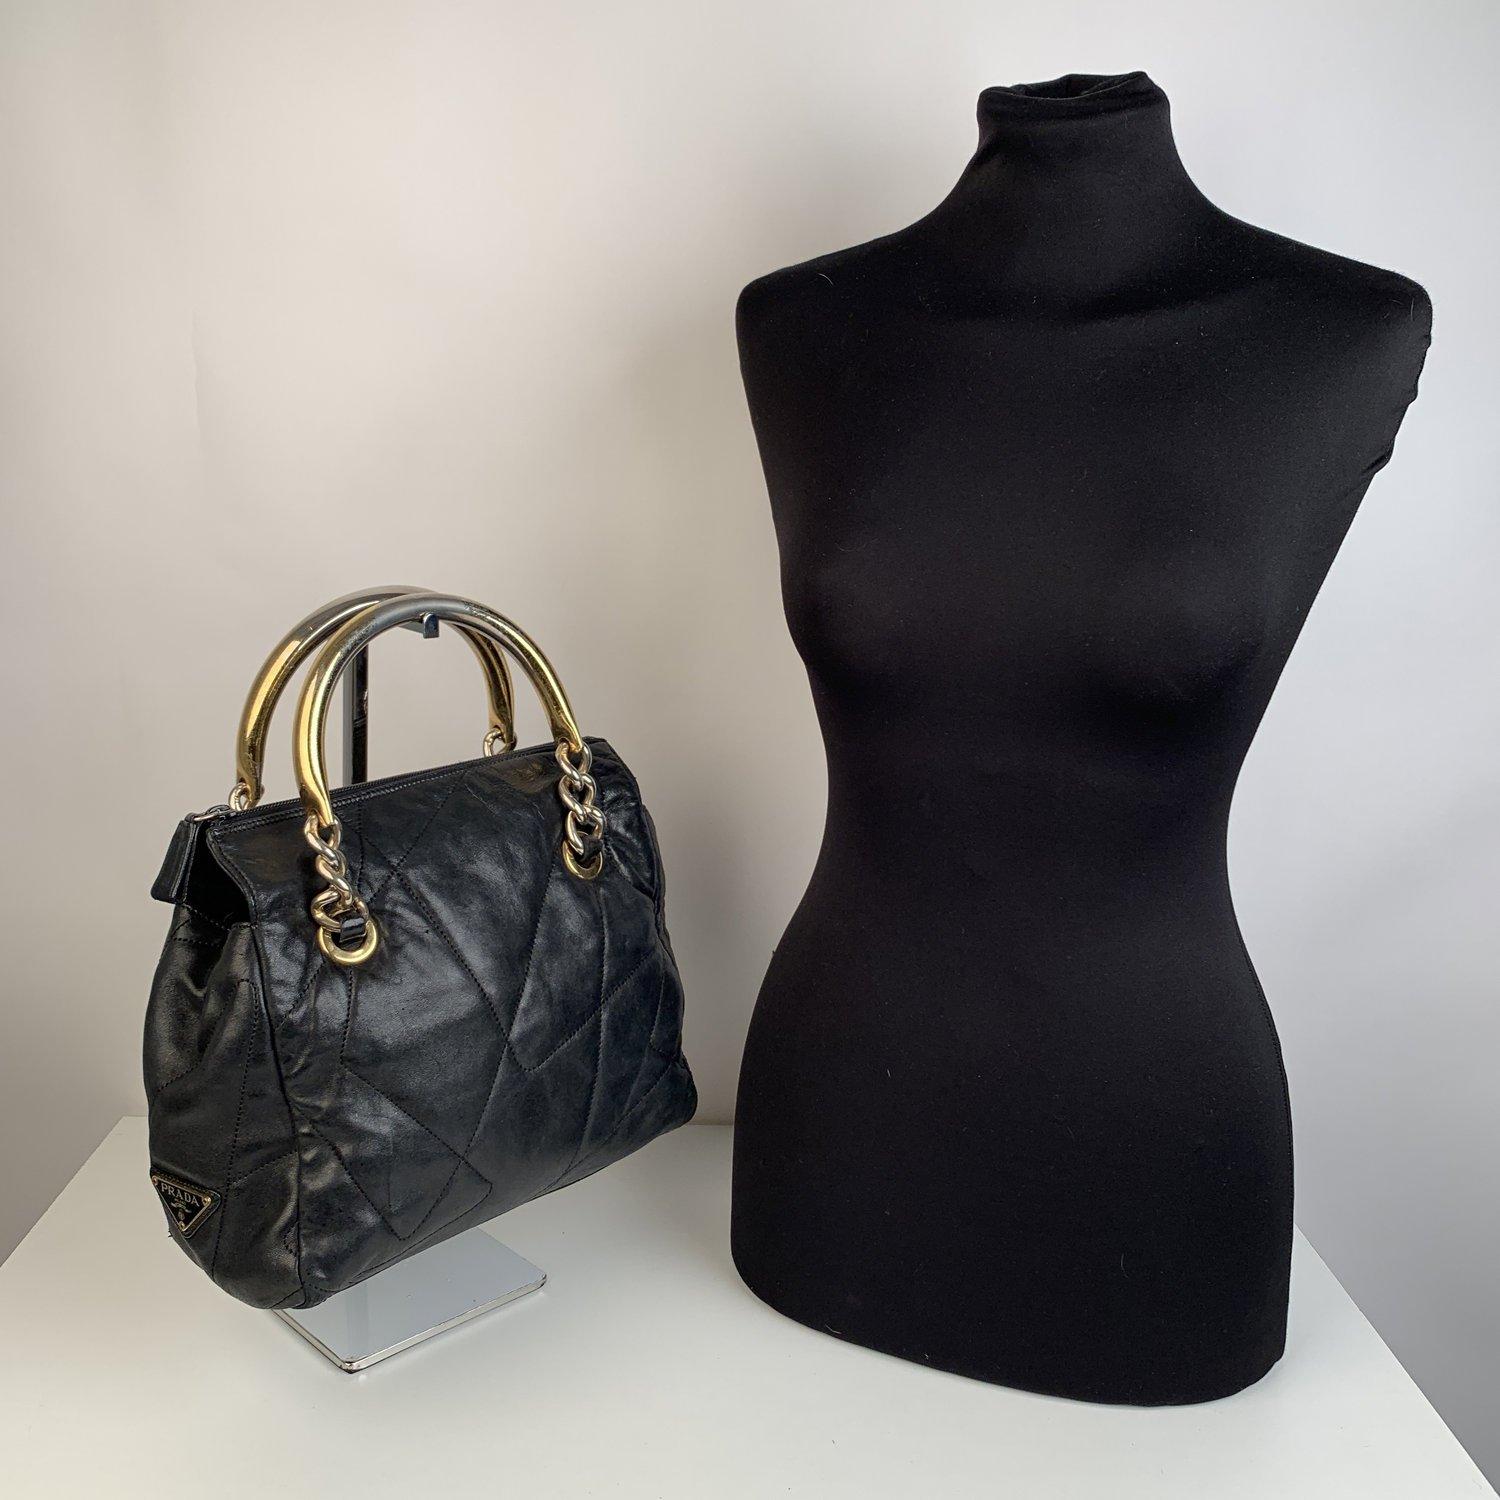 Prada Vintage black quilted leather tote bag. It features gold metal handles. Upper zipper closure. Prada signature fabric lining. 1 side zip pocket inside. Prada triangle logo plaque on the front. 'Prada Milano - Made in Italy' tag inside. Small